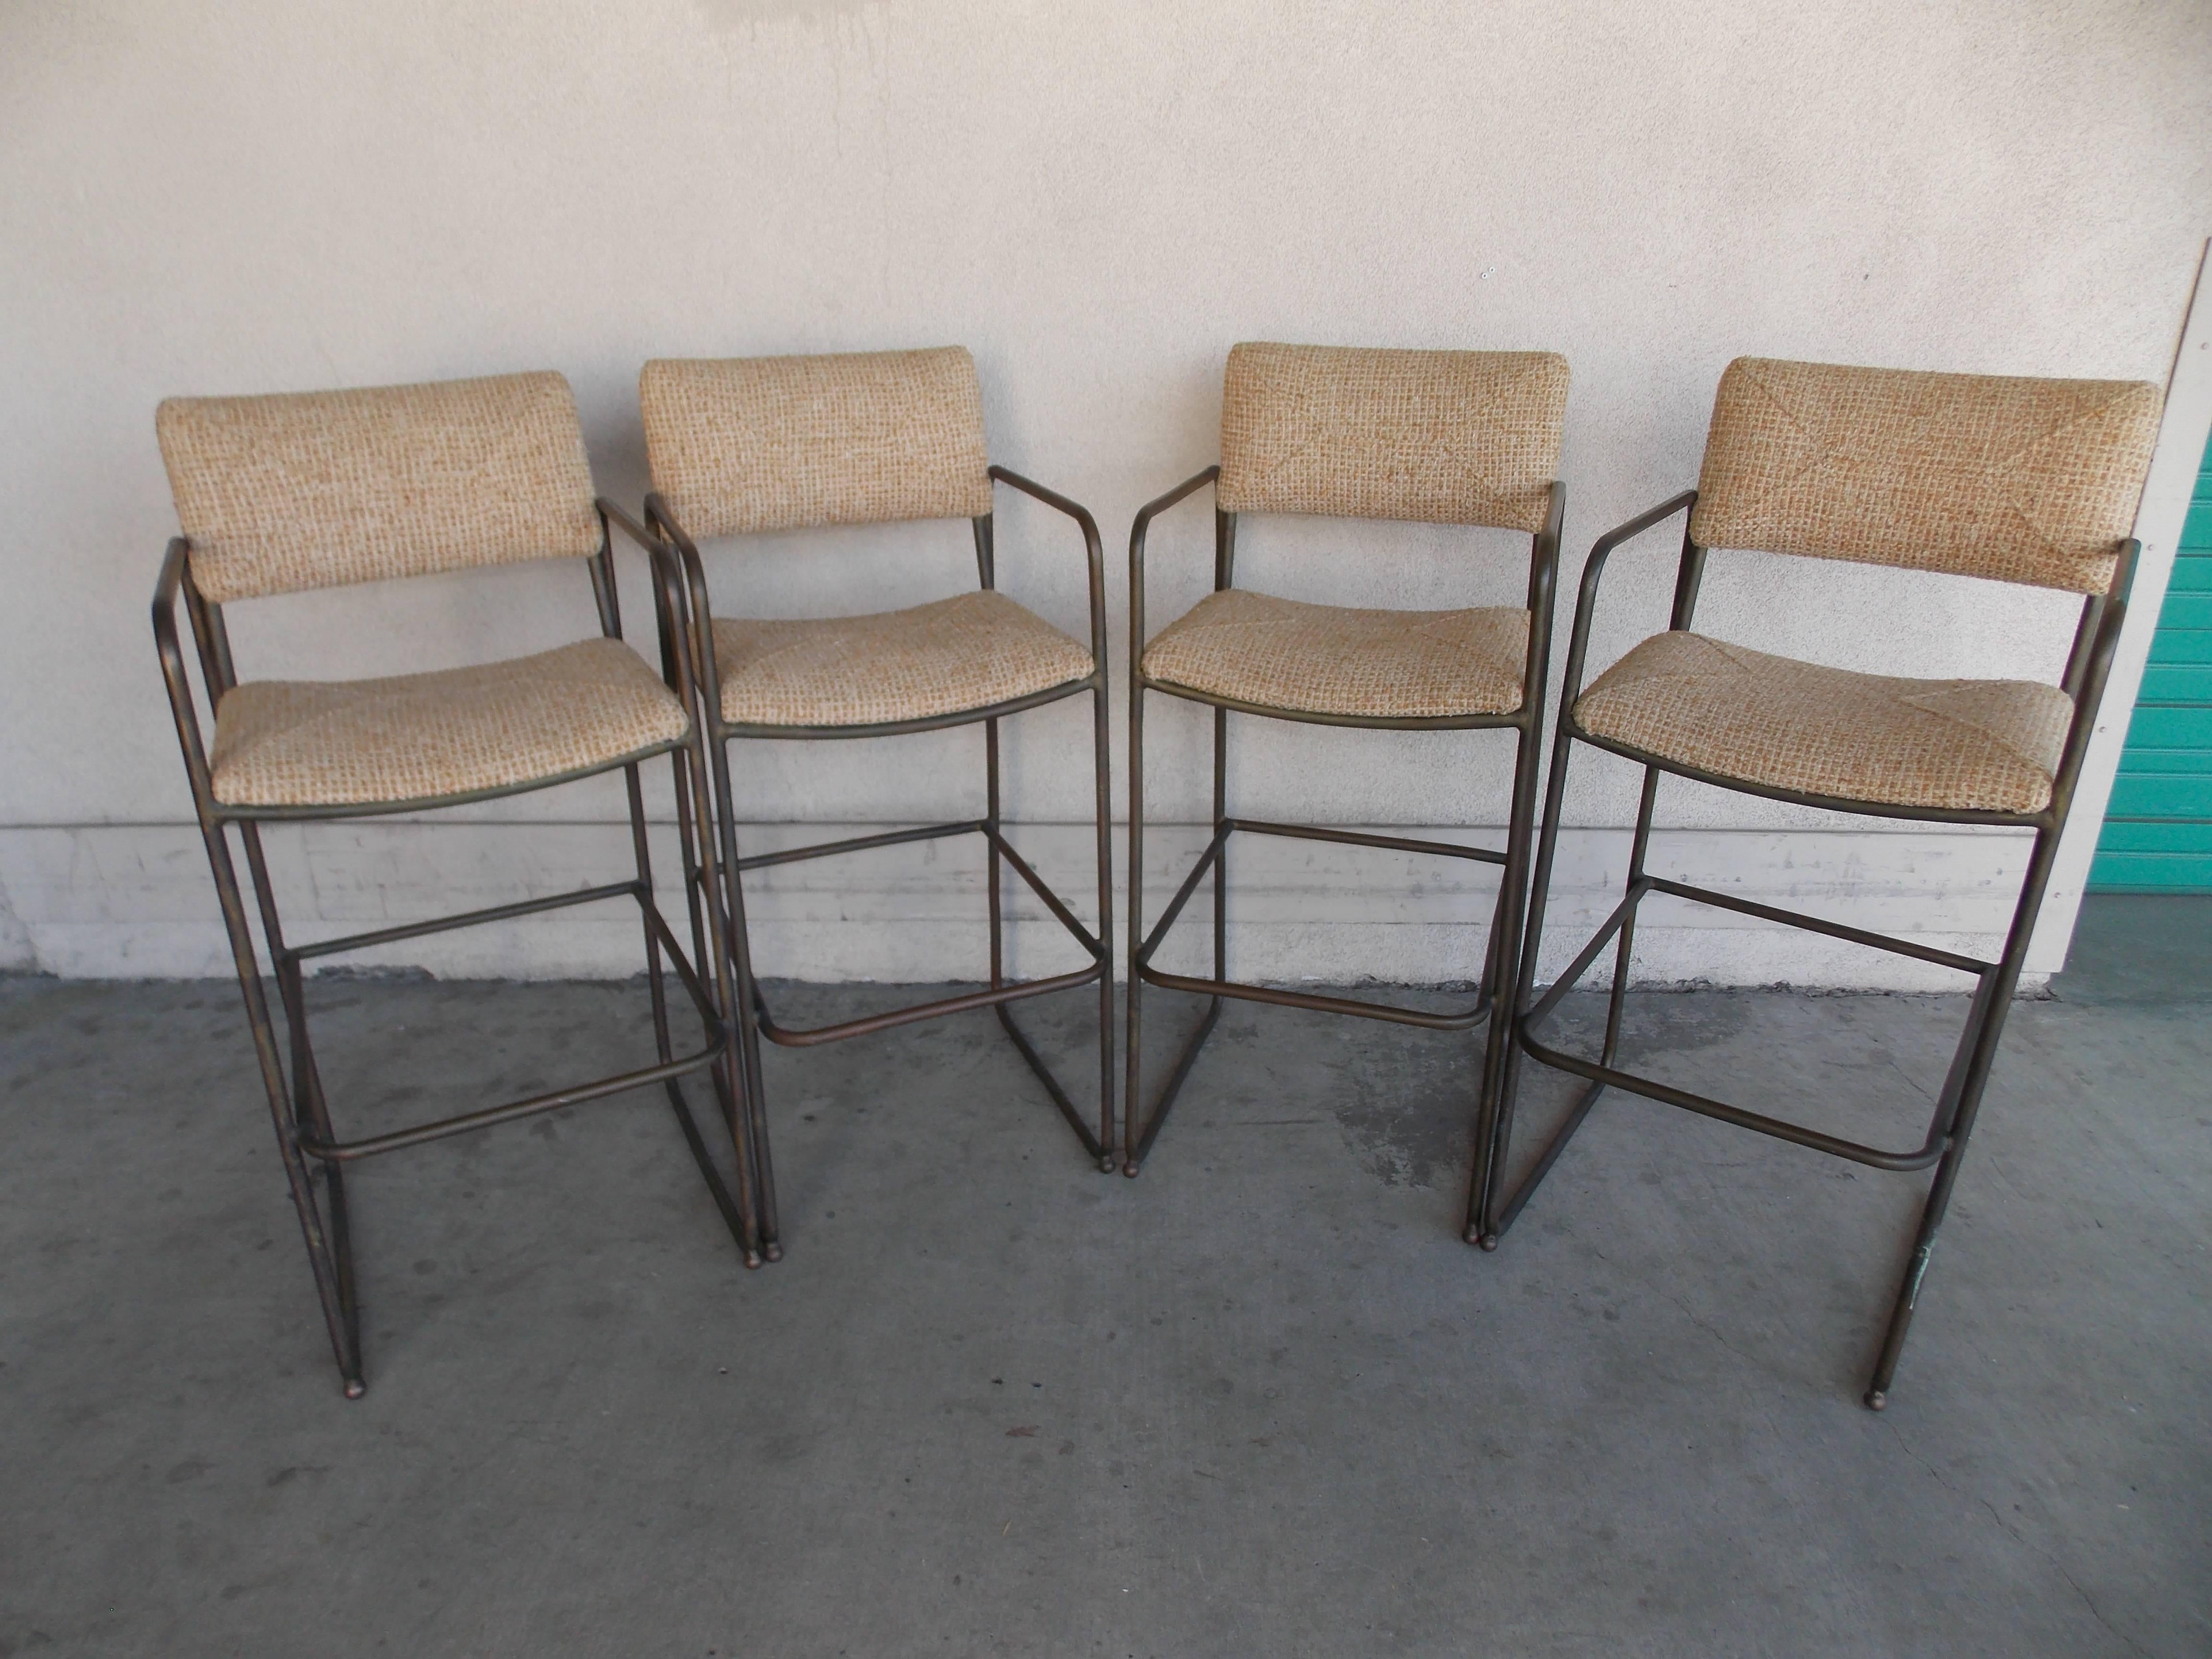 This is a rare set to come up for sale.
Only a few of these were made. 
The upholstered seating was probably a custom order. Because, these normally came in rope, which was inspired by Walter Lambs outdoor furniture, whom Mr. Stewart worked